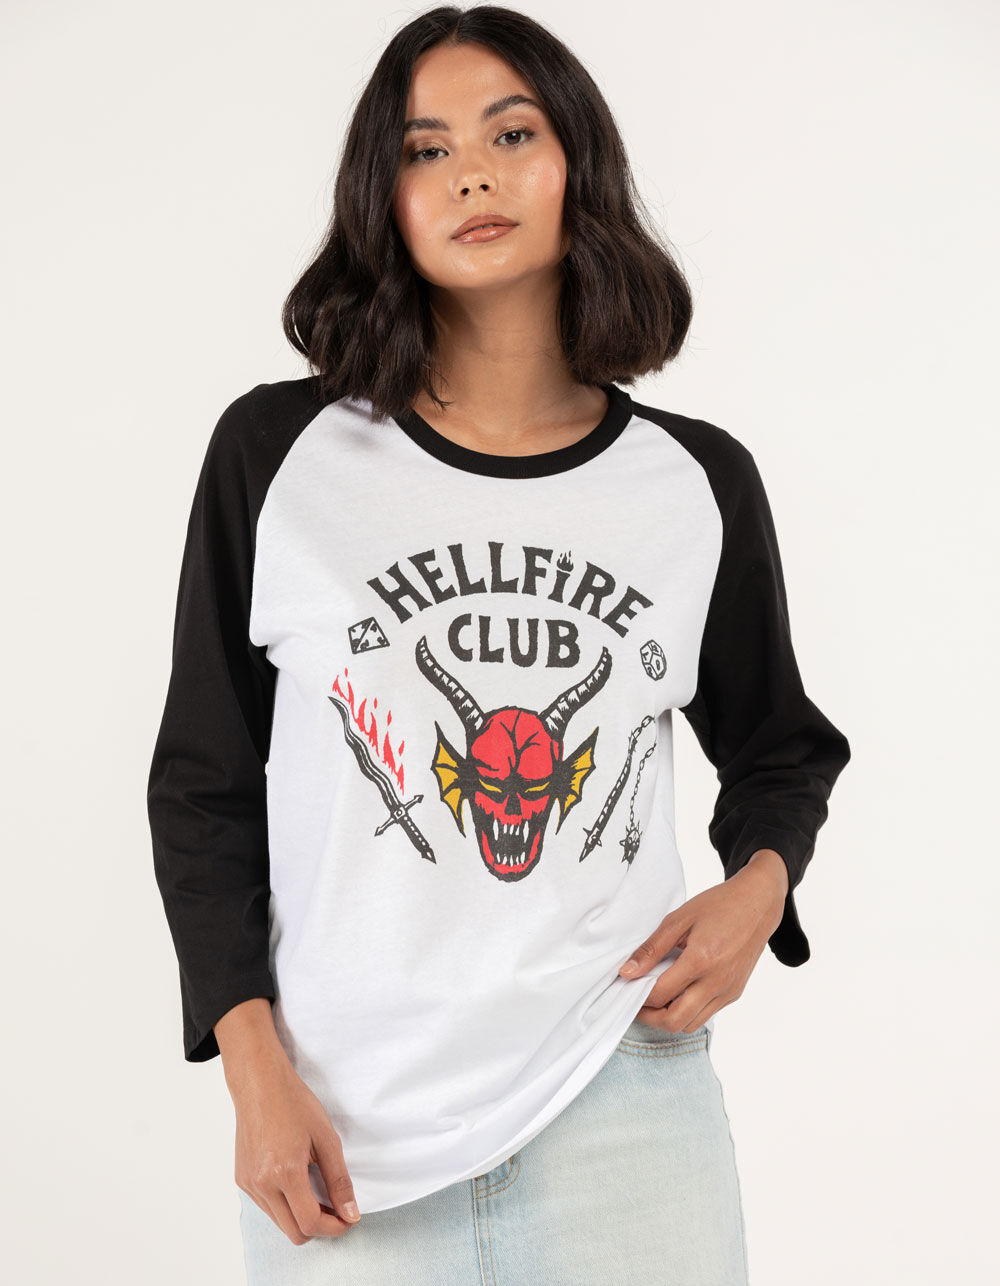 The 'Stranger Things' Hellfire Club Shirt Is An Easy Halloween Costume  Perfect for Procrastinators